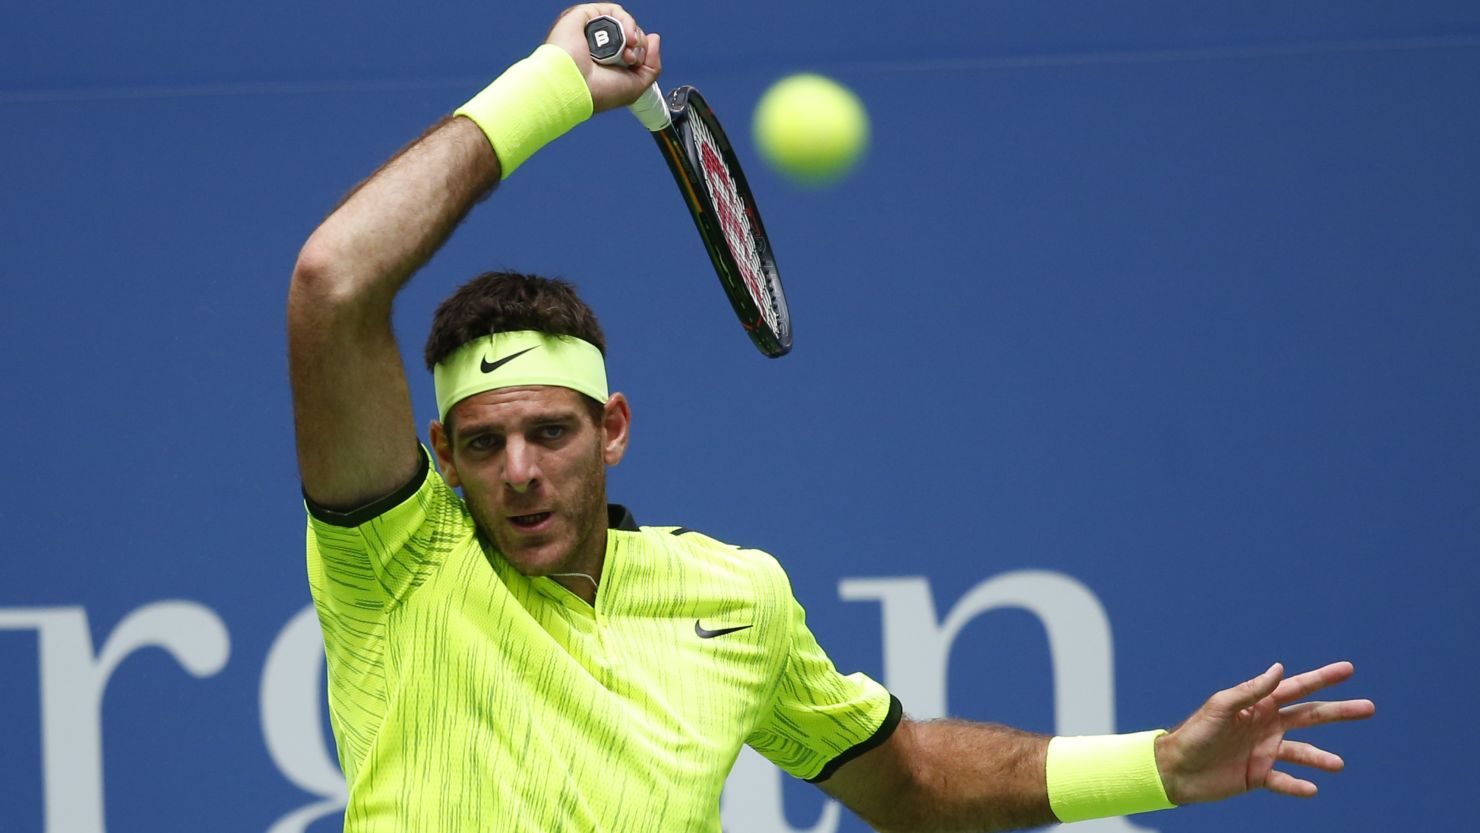 Del Potro has had a strong second half of the season with Olympic singles silver, a US Open quarterfinals spot and his first title in more than two years. 